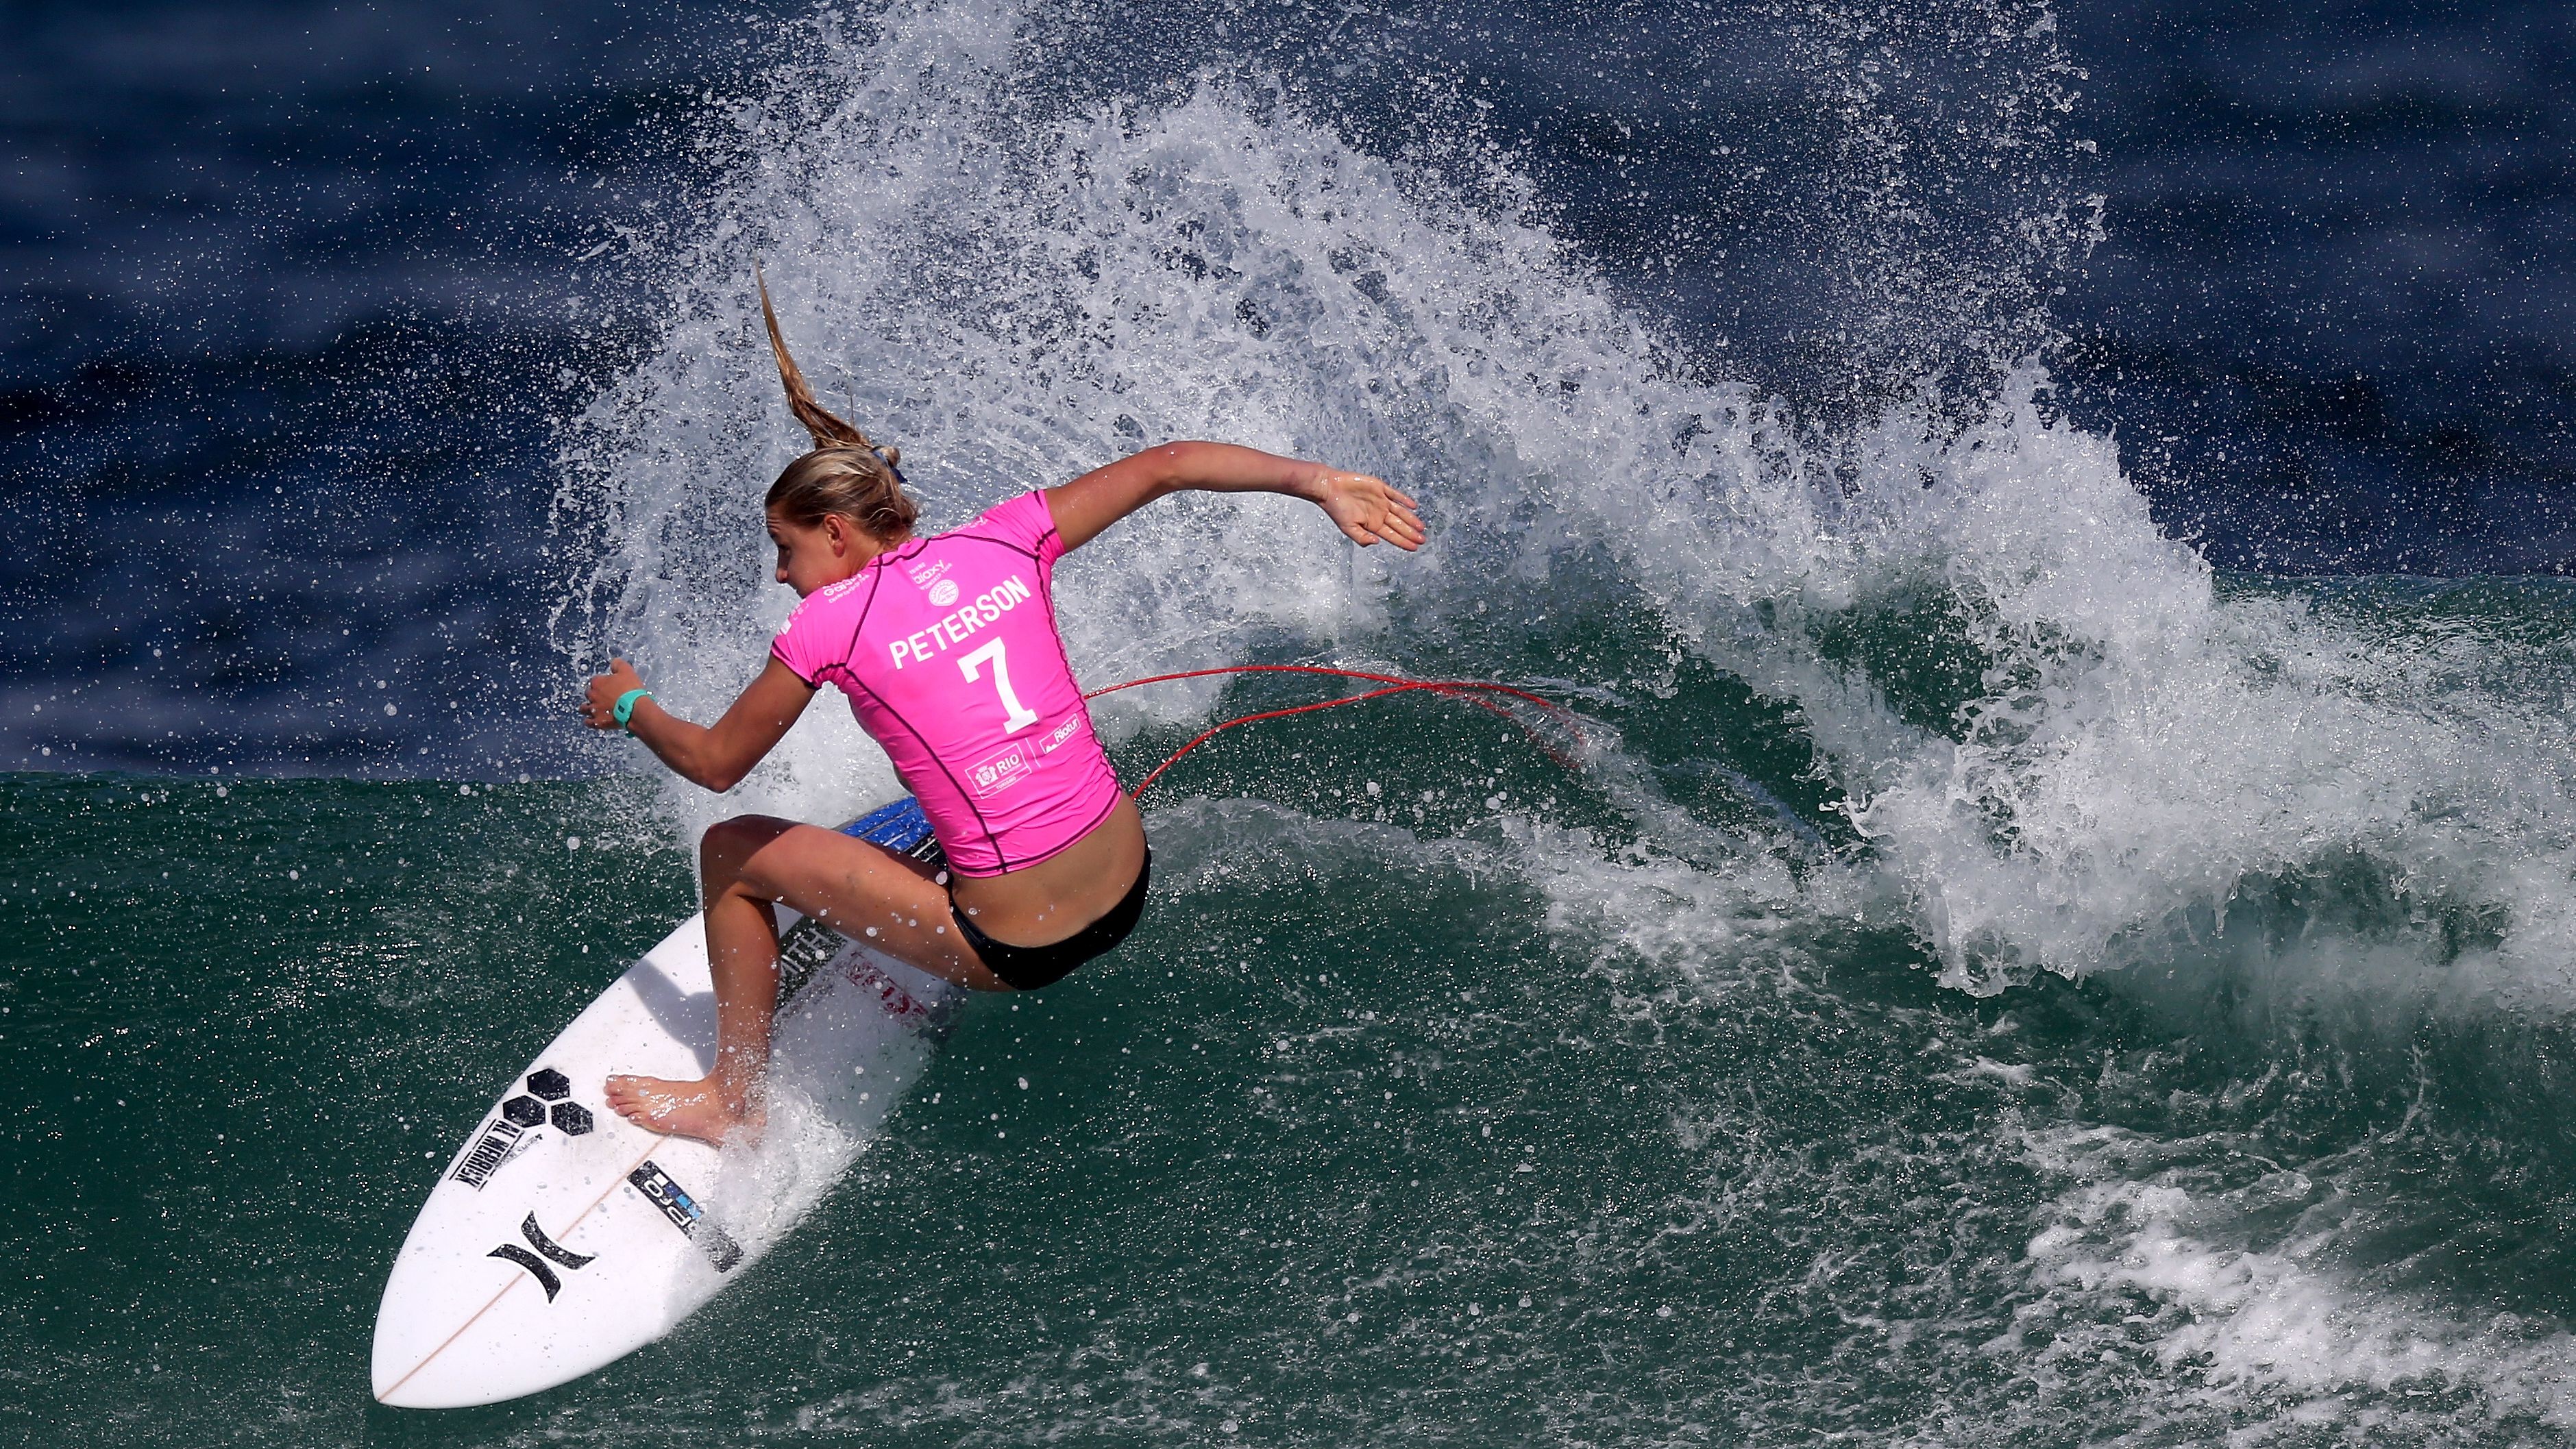 At 23 years old, Lakey Peterson is the No. 1 female surfer.